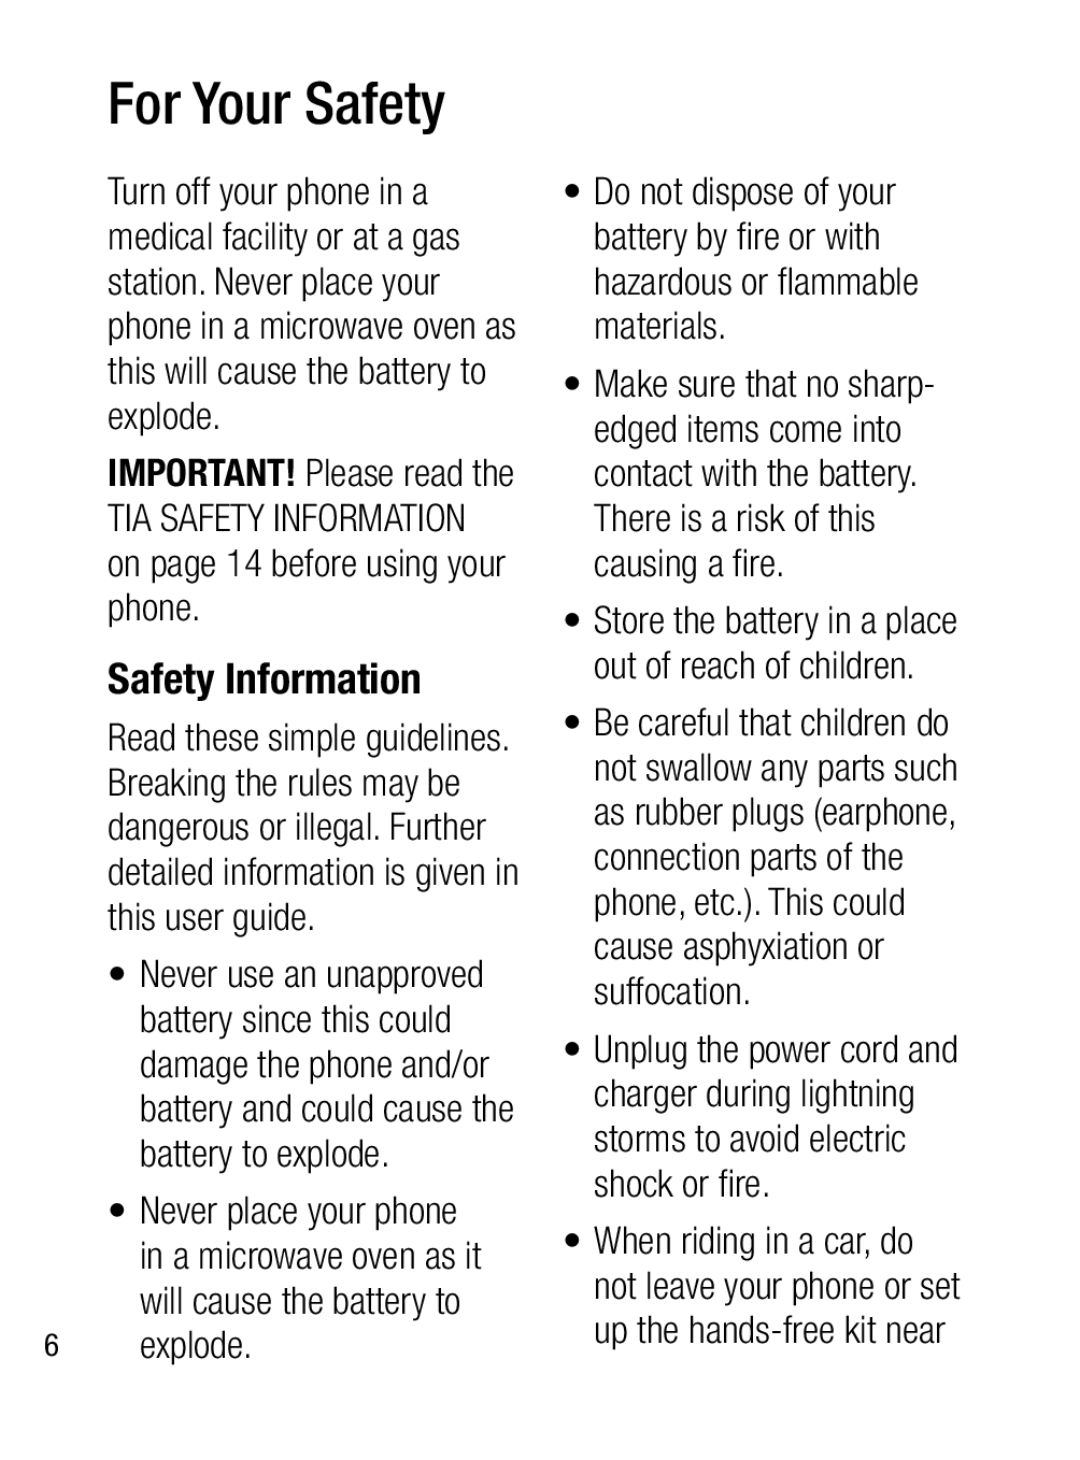 LG Electronics A133CH manual Safety Information, Never place your phone, explode, For Your Safety 